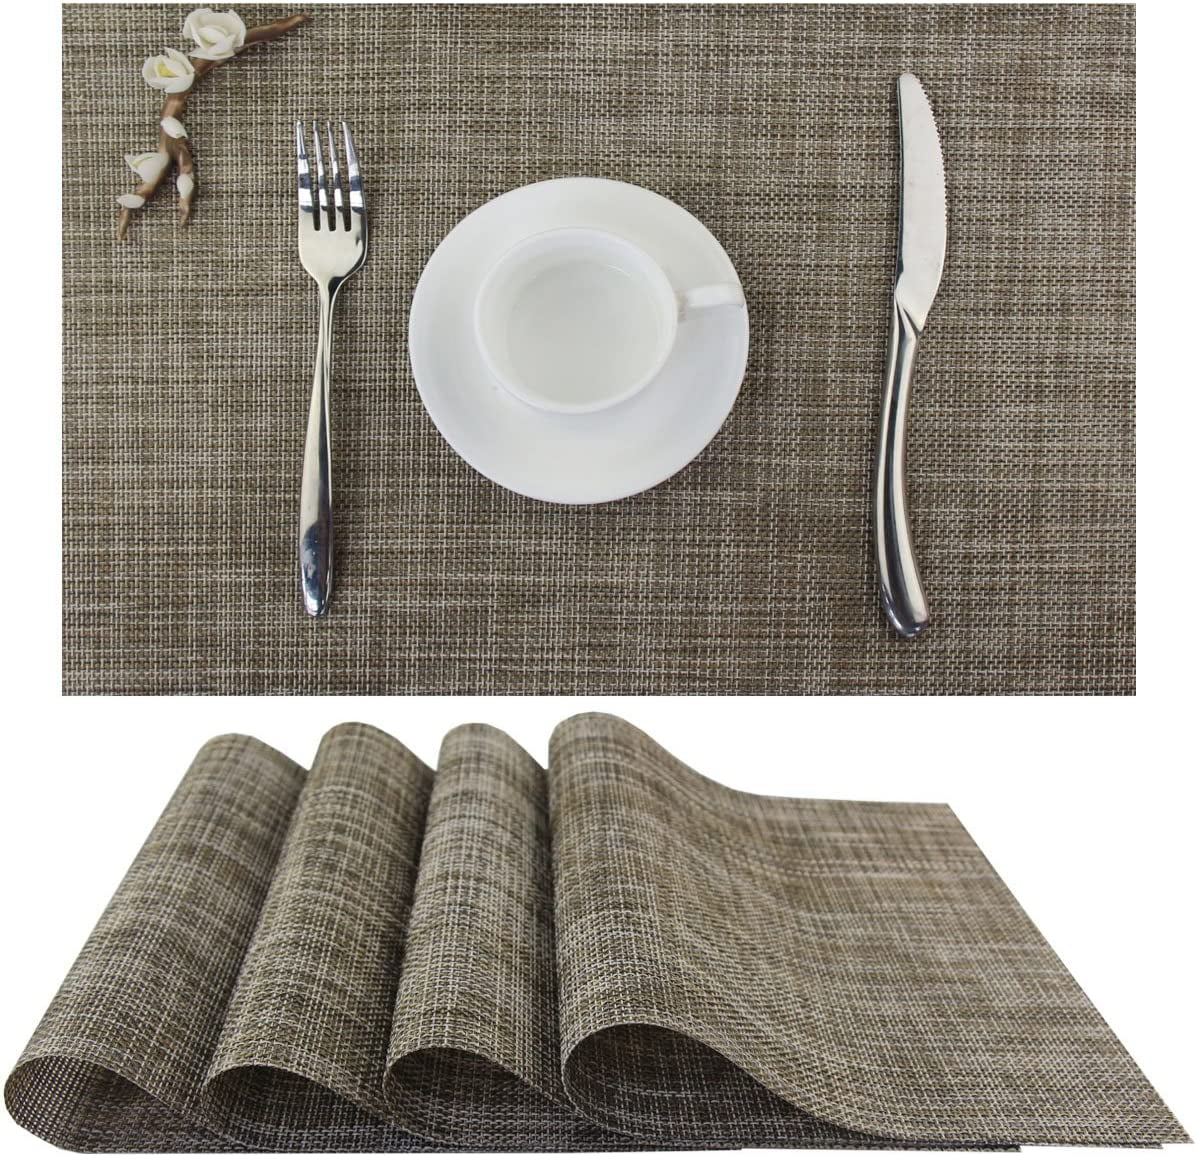 Bright Dream Placemats Washable Easy Clean for Dining Table Heat-resistand PVC Table Mats 12x18 inches placemats Set of 4, Silver